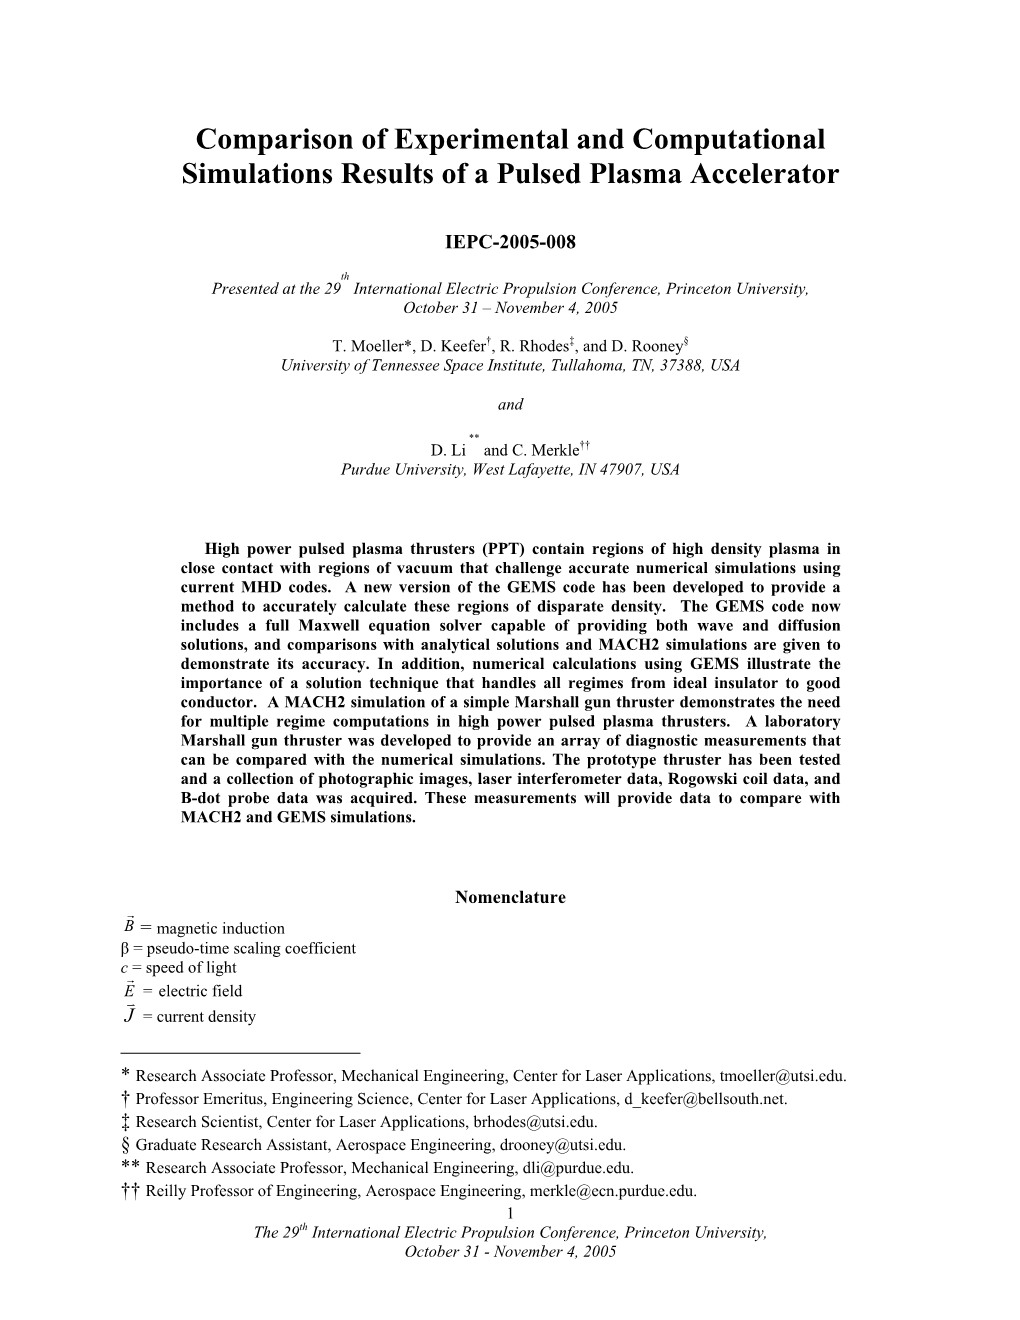 Comparison of Experimental and Simulation Results of A